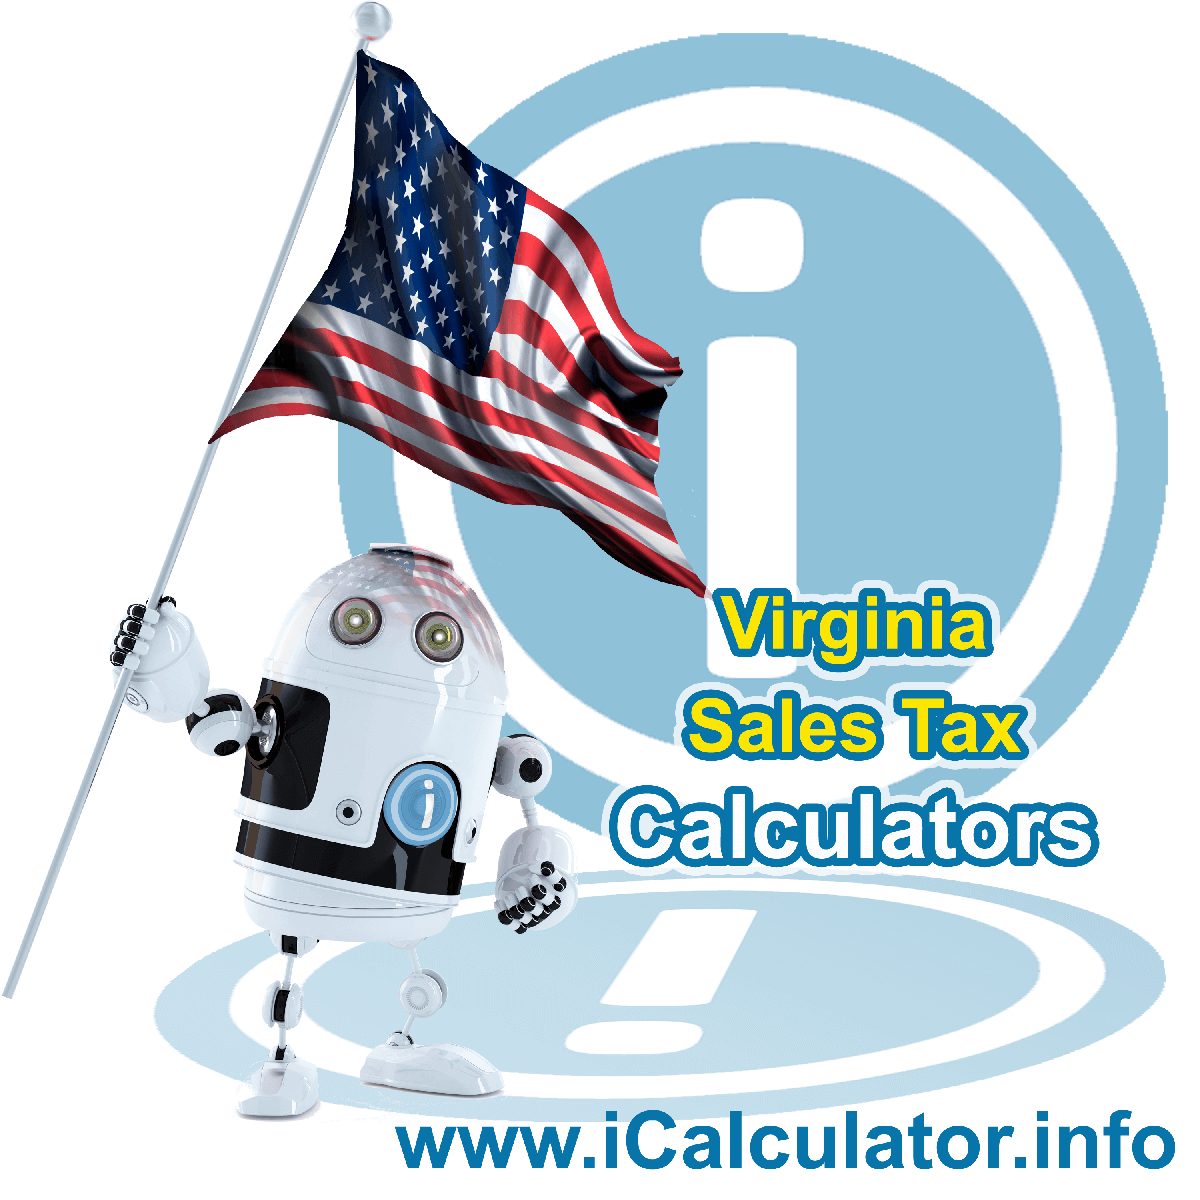 Virginia Sales Tax Comparison Calculator: This image illustrates a calculator robot comparing sales tax in Virginia manually using the Virginia Sales Tax Formula. You can use this information to compare Sales Tax manually or use the Virginia Sales Tax Comparison Calculator to calculate and compare Virginia sales tax online.